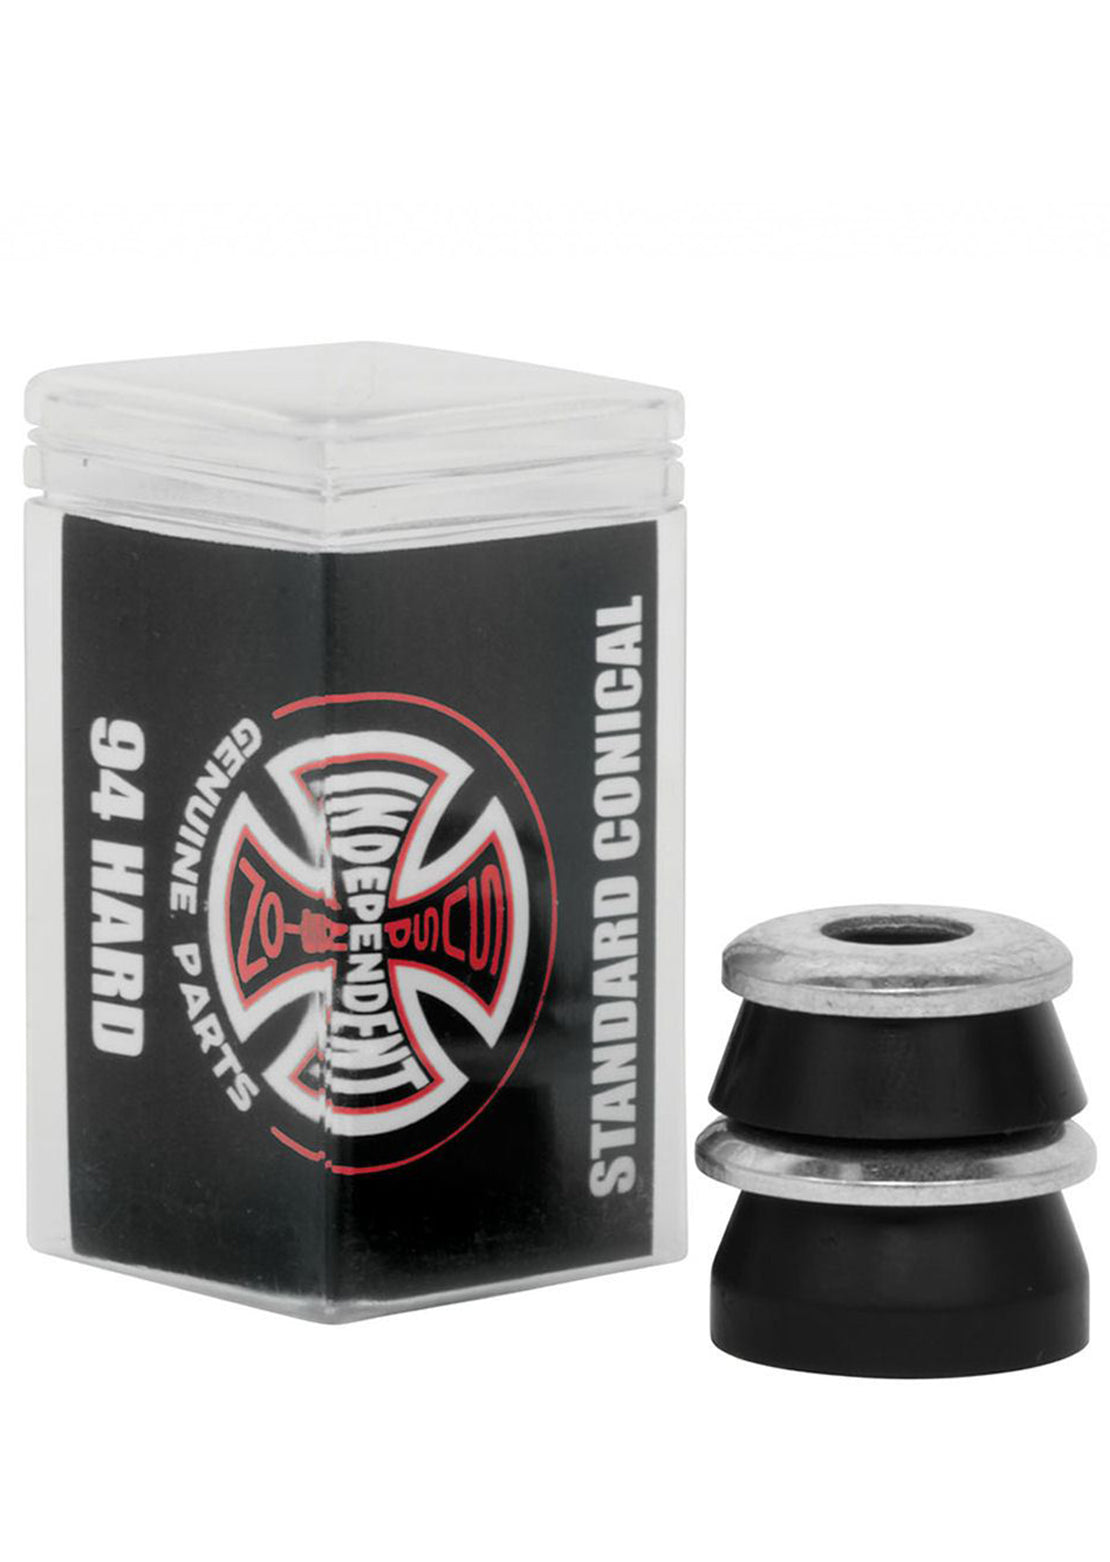 Independent Standard Bushings Black - Conical - Hard - 94a